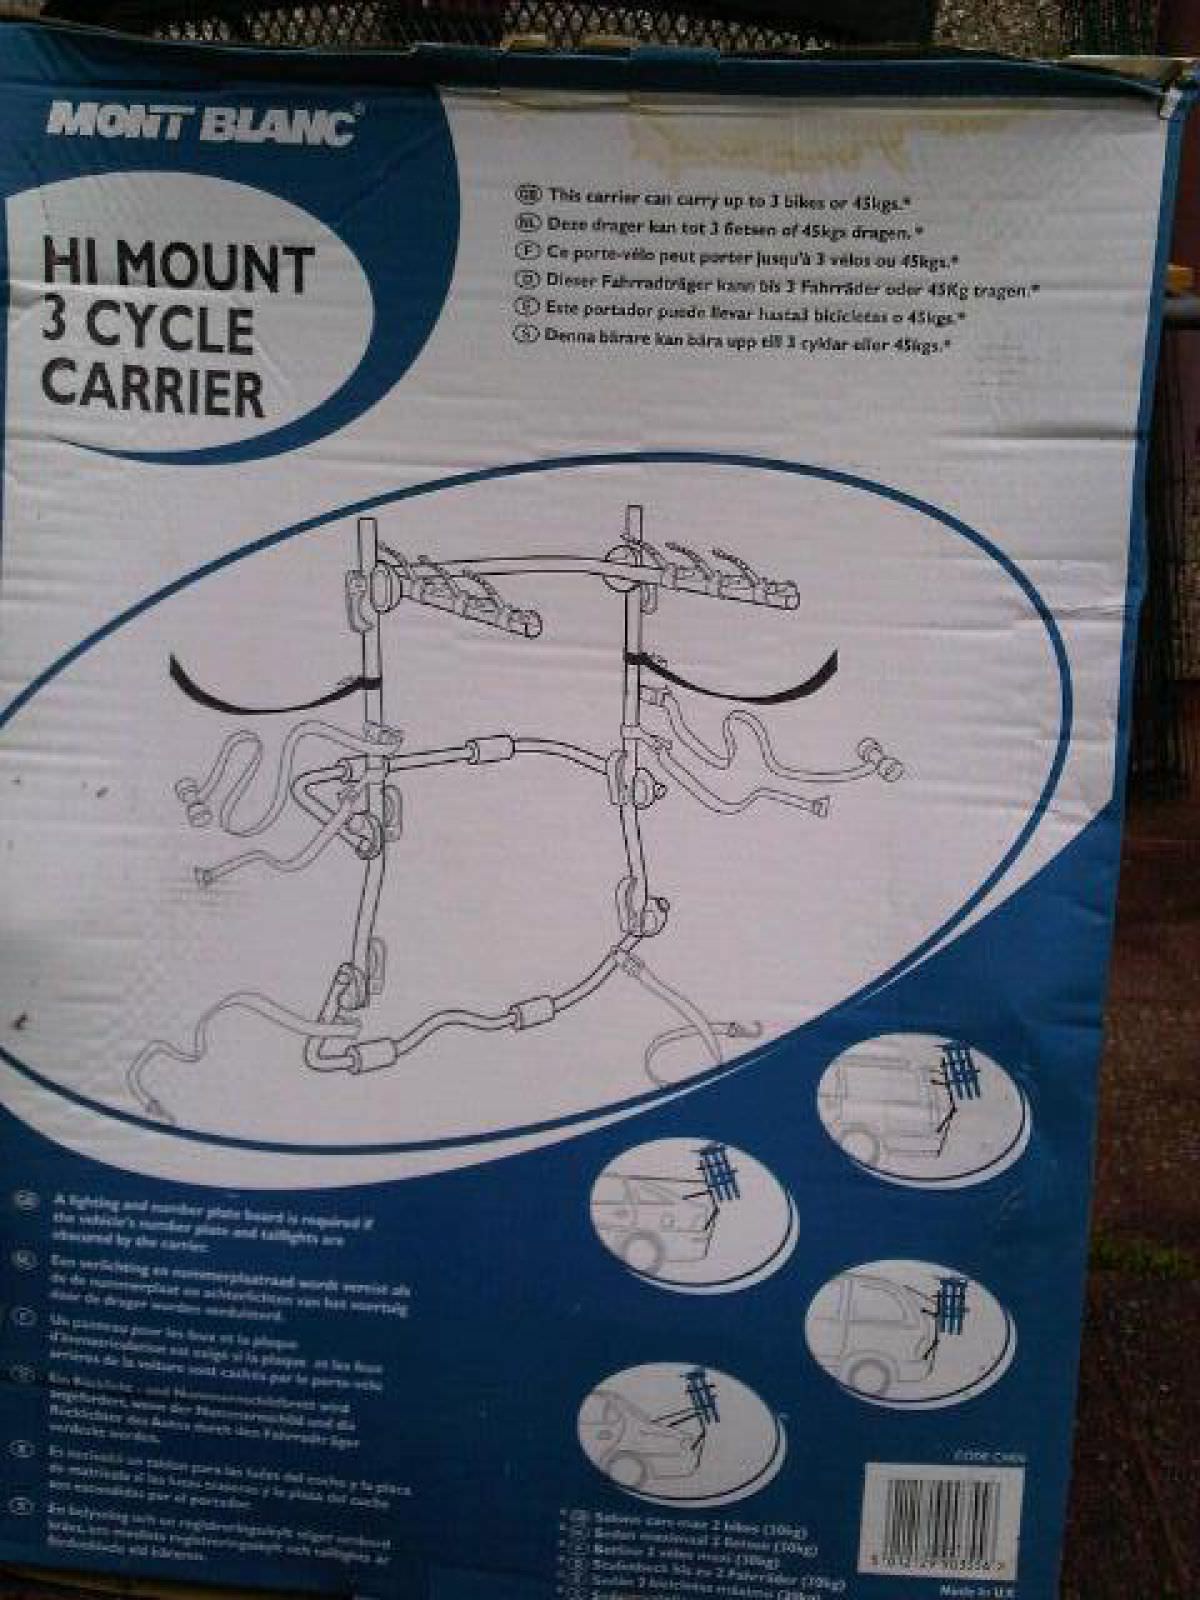 Hi Mount Cycle Carrier